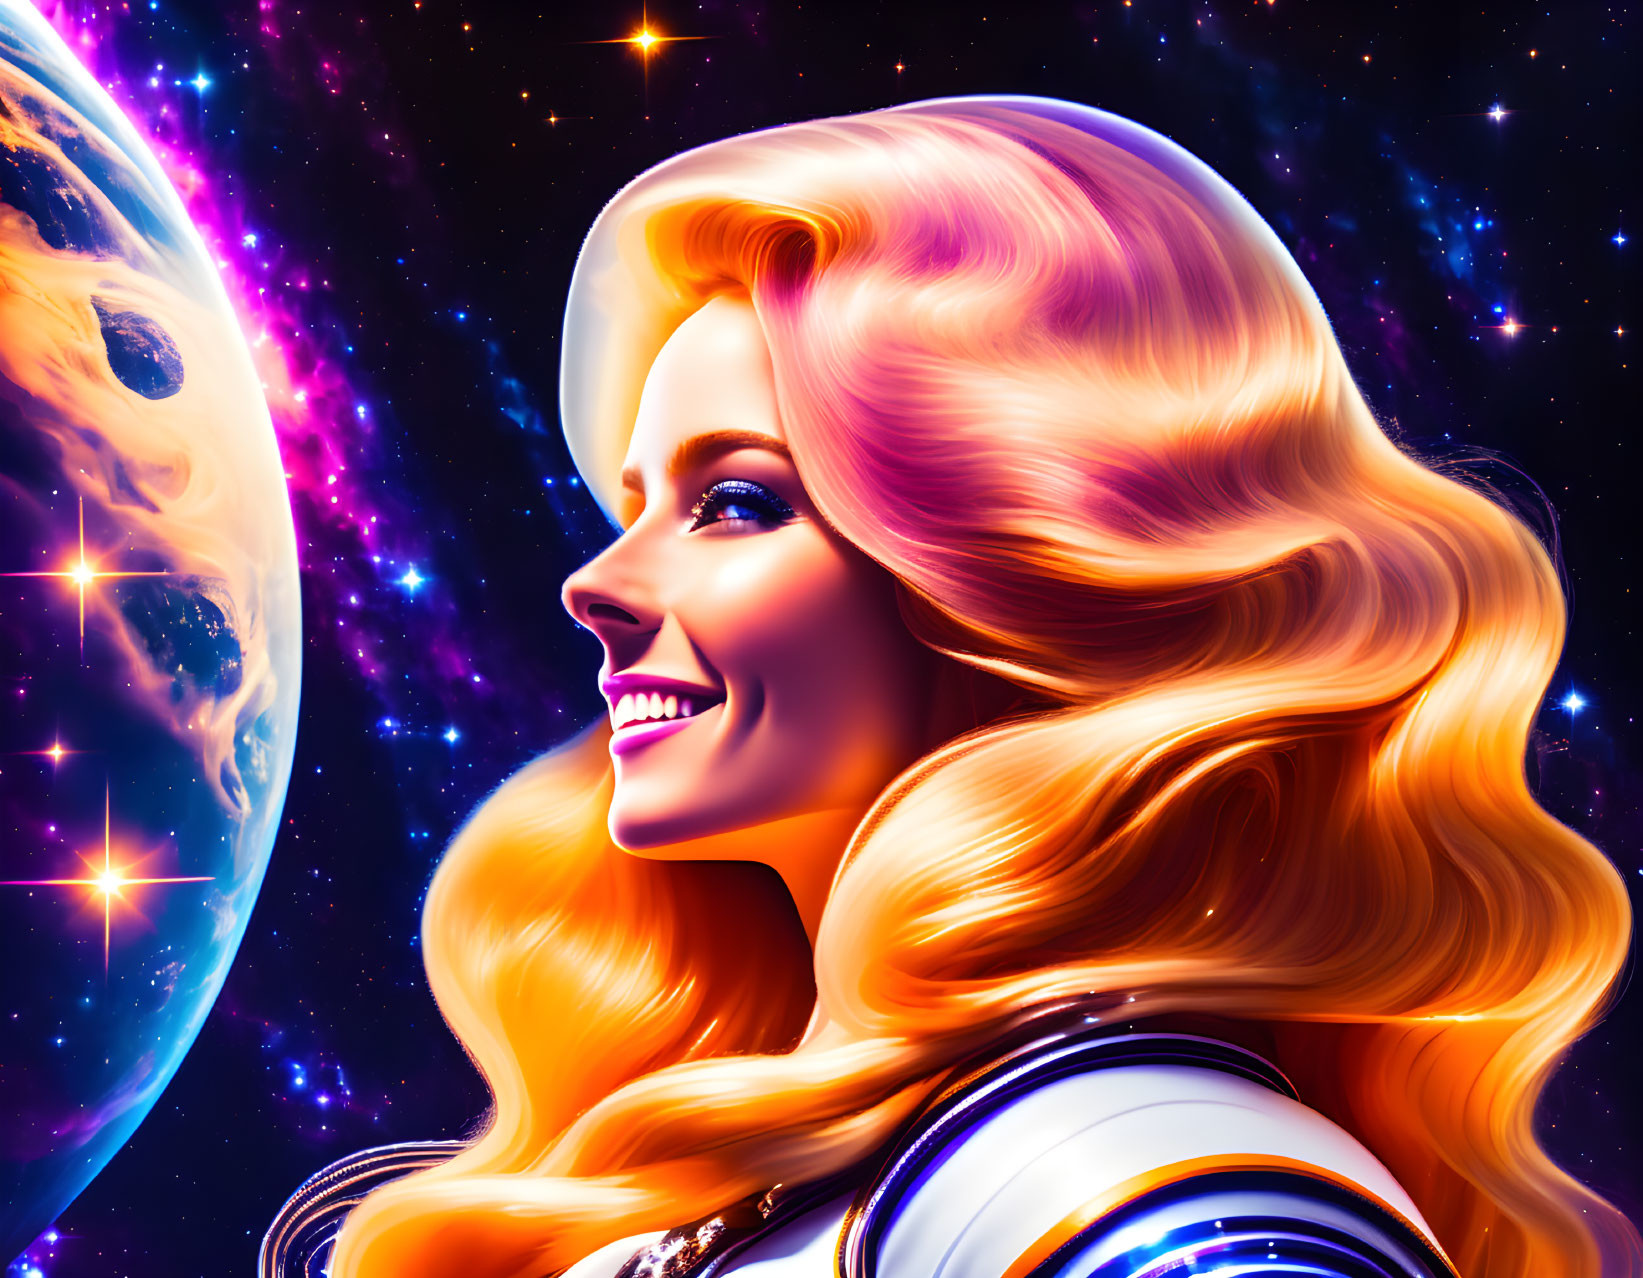 Smiling astronaut with flowing hair in cosmic scene